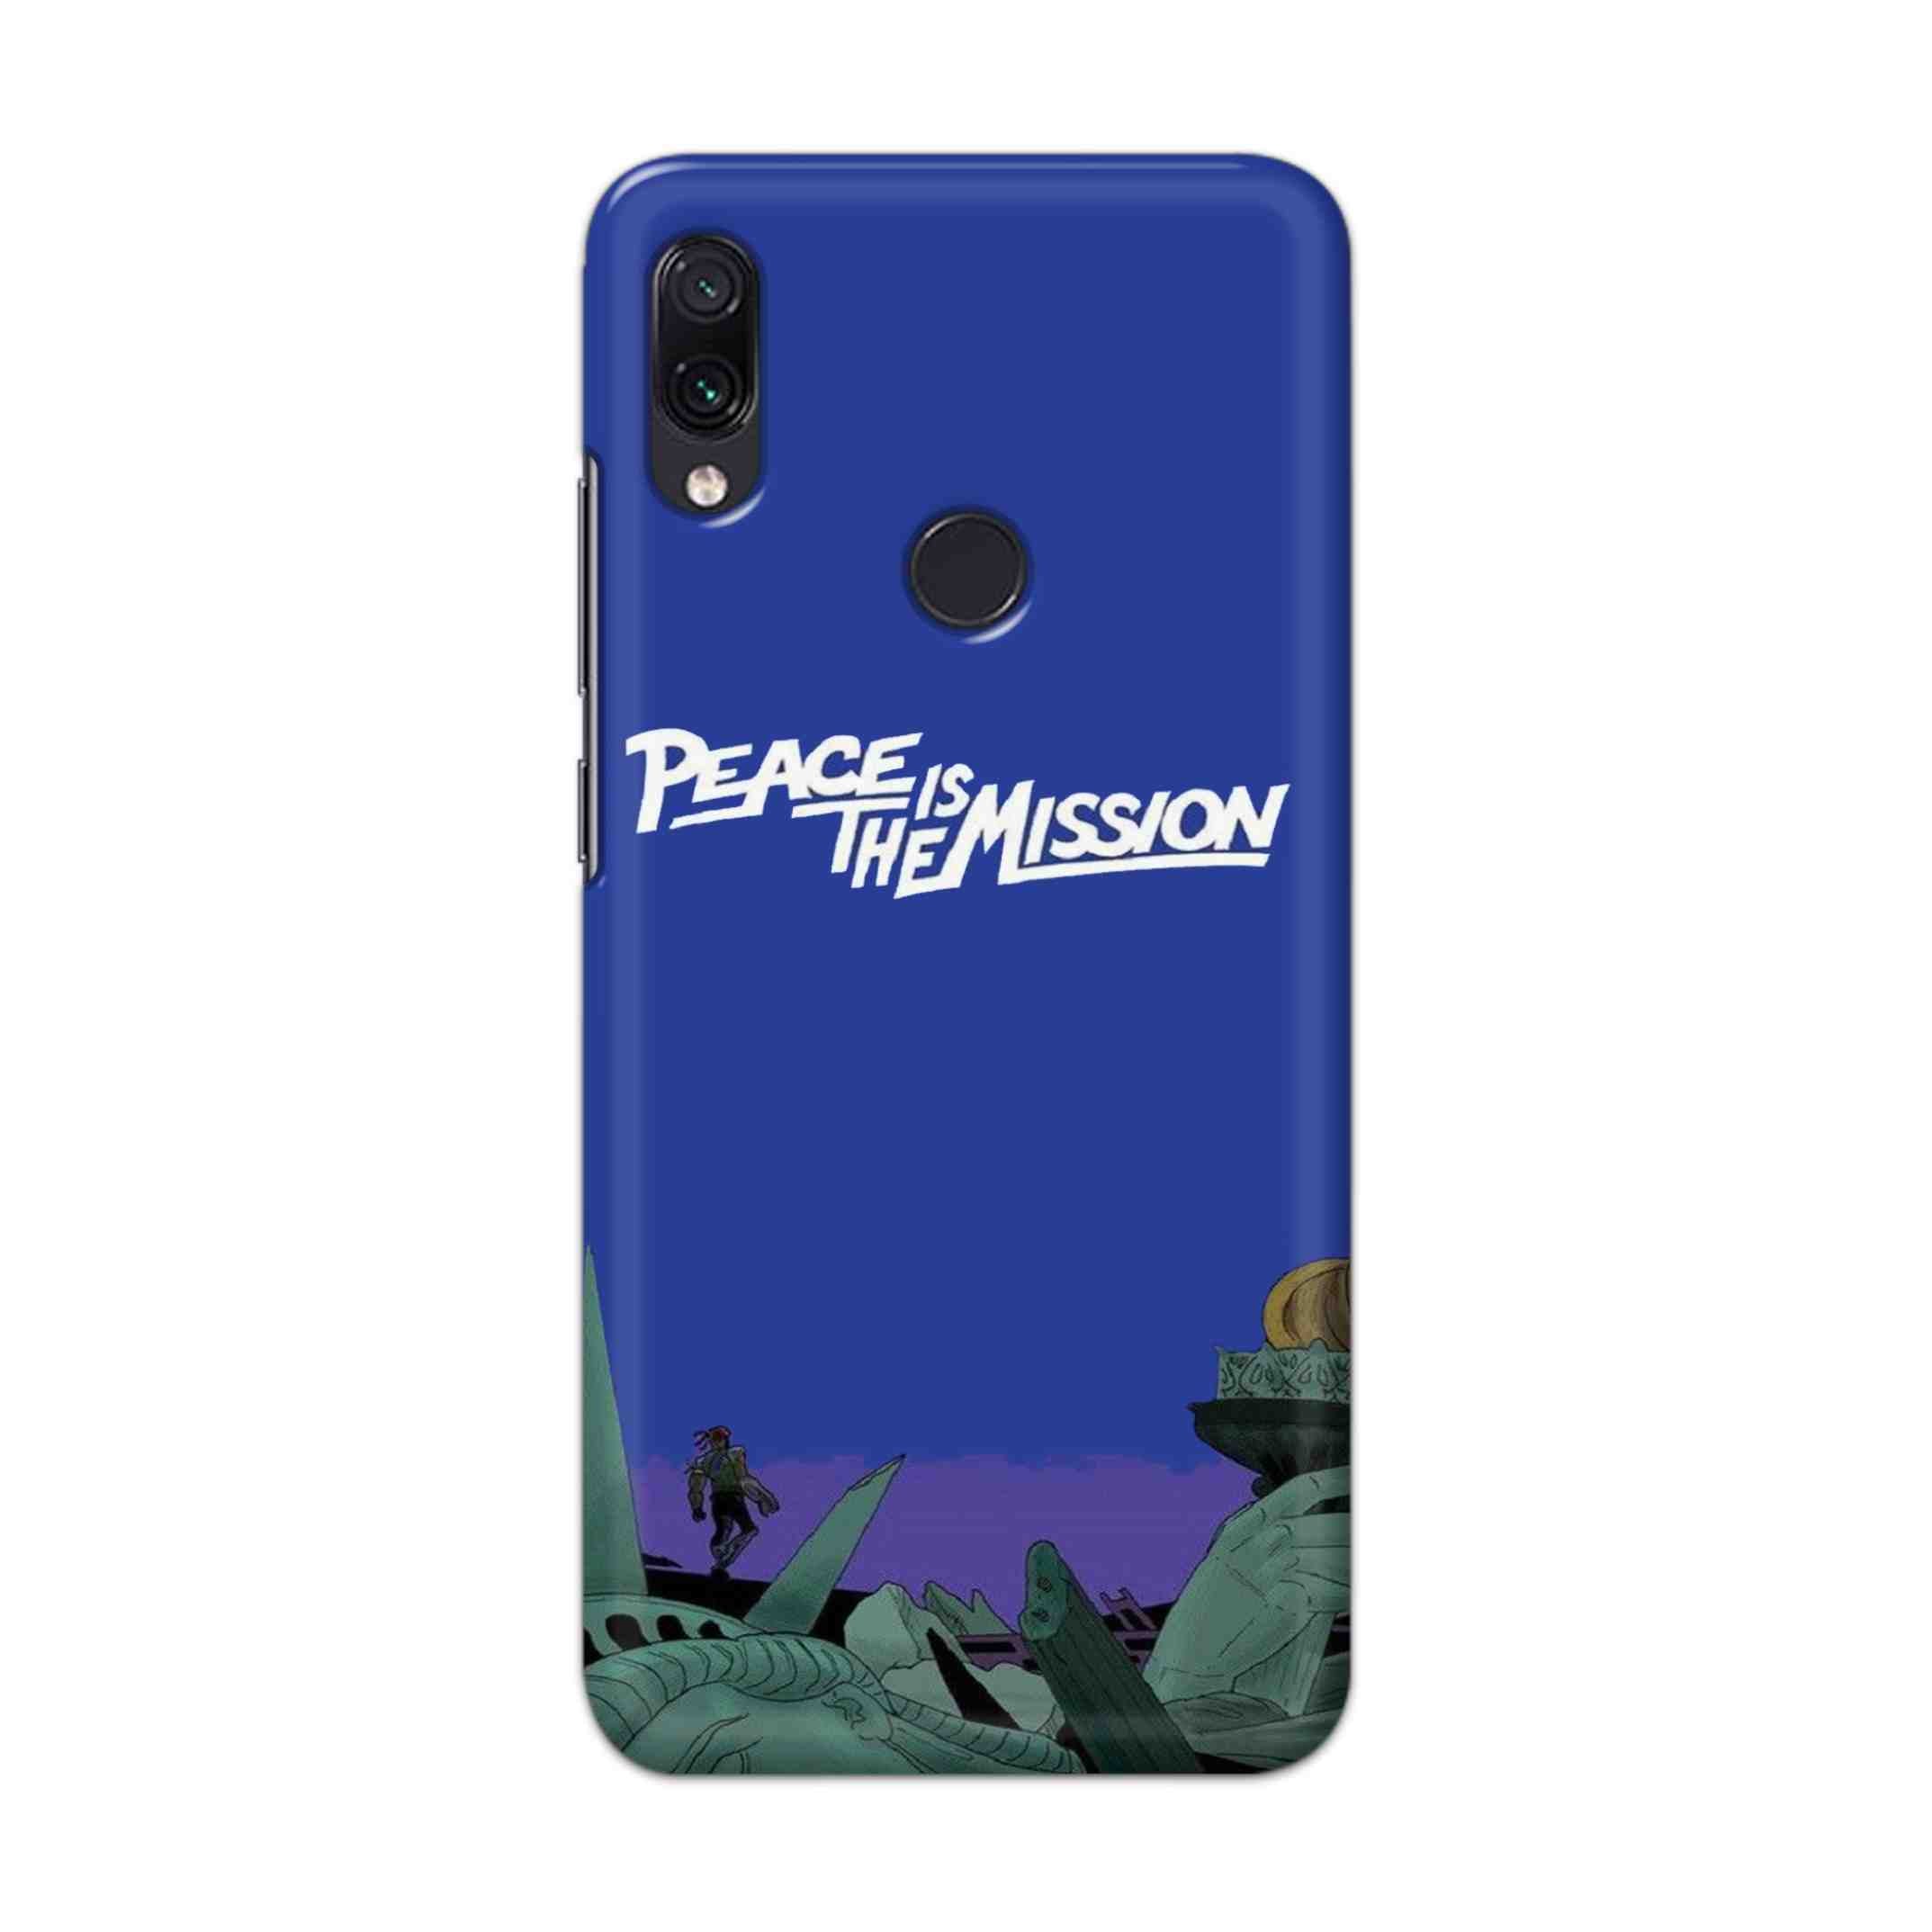 Buy Peace Is The Misson Hard Back Mobile Phone Case Cover For Redmi Note 7 / Note 7 Pro Online